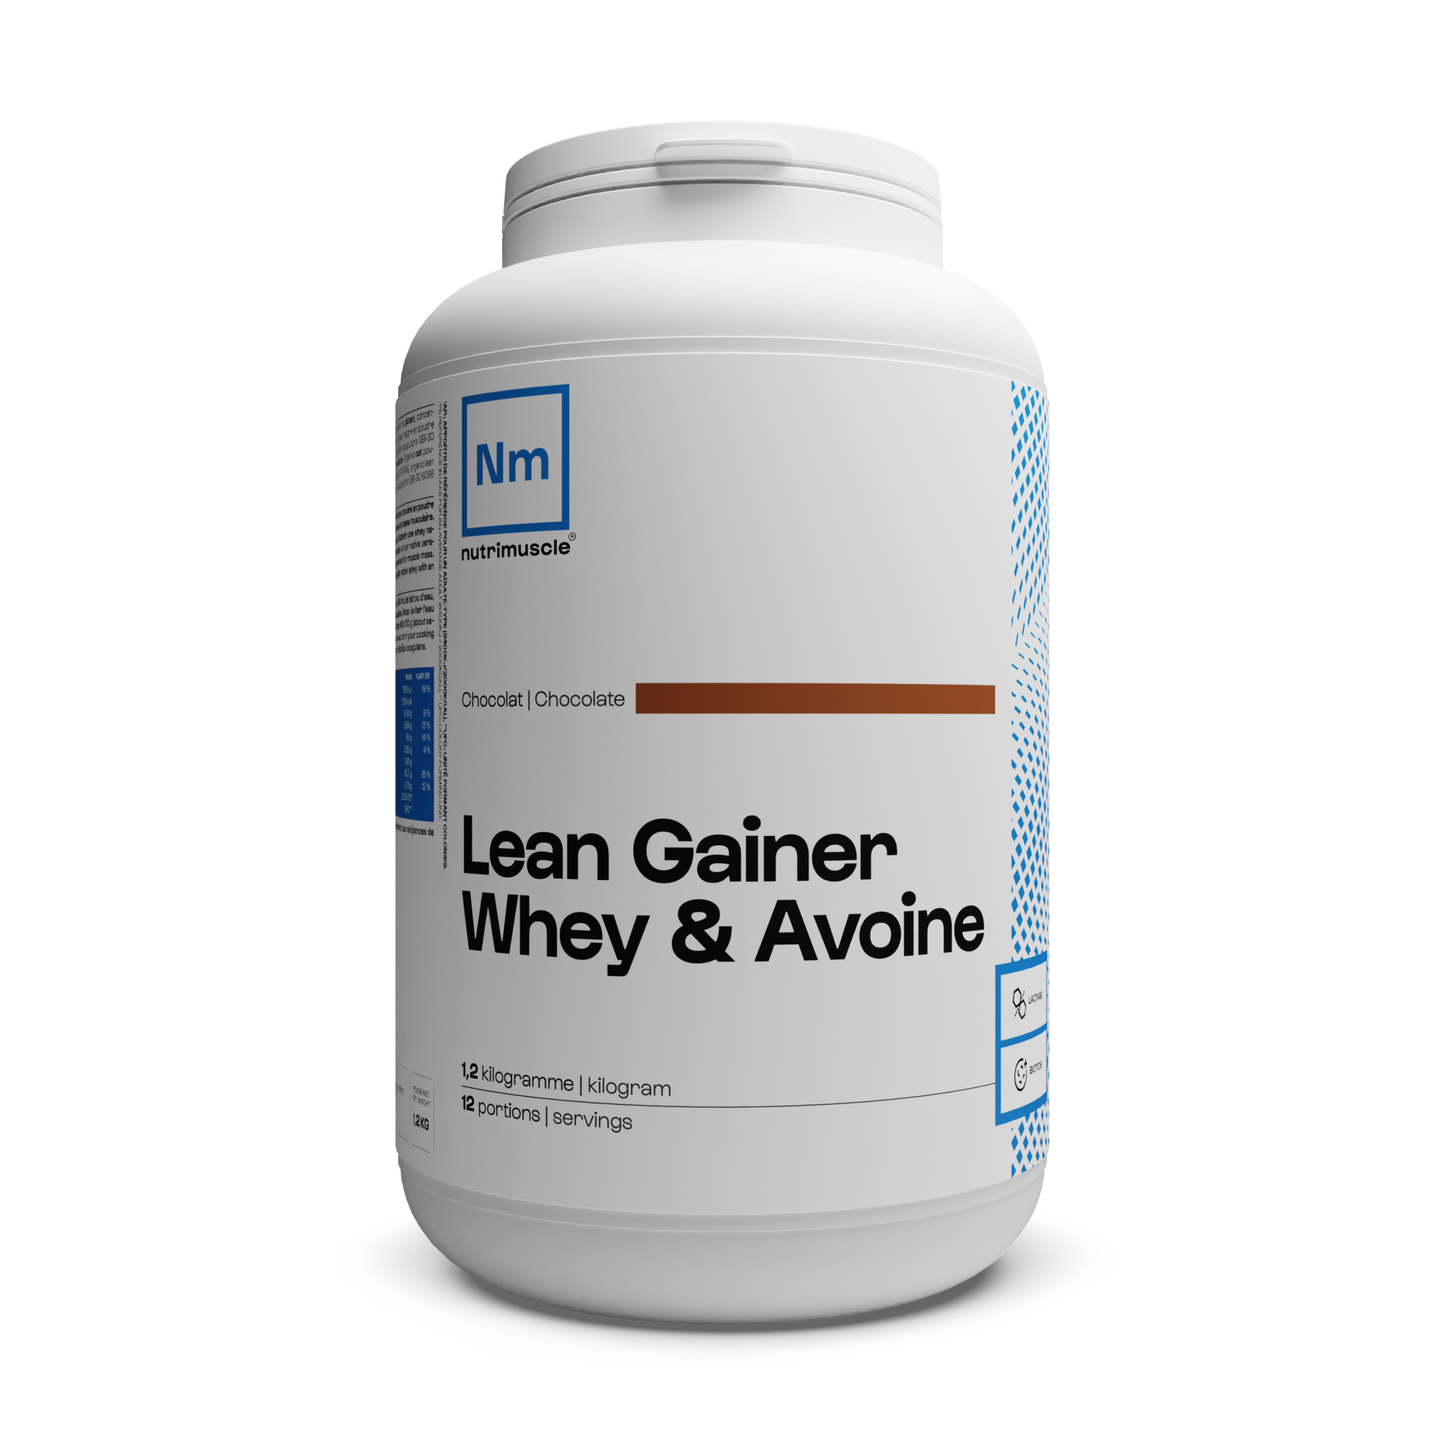 Lean Gainer Whey Oats